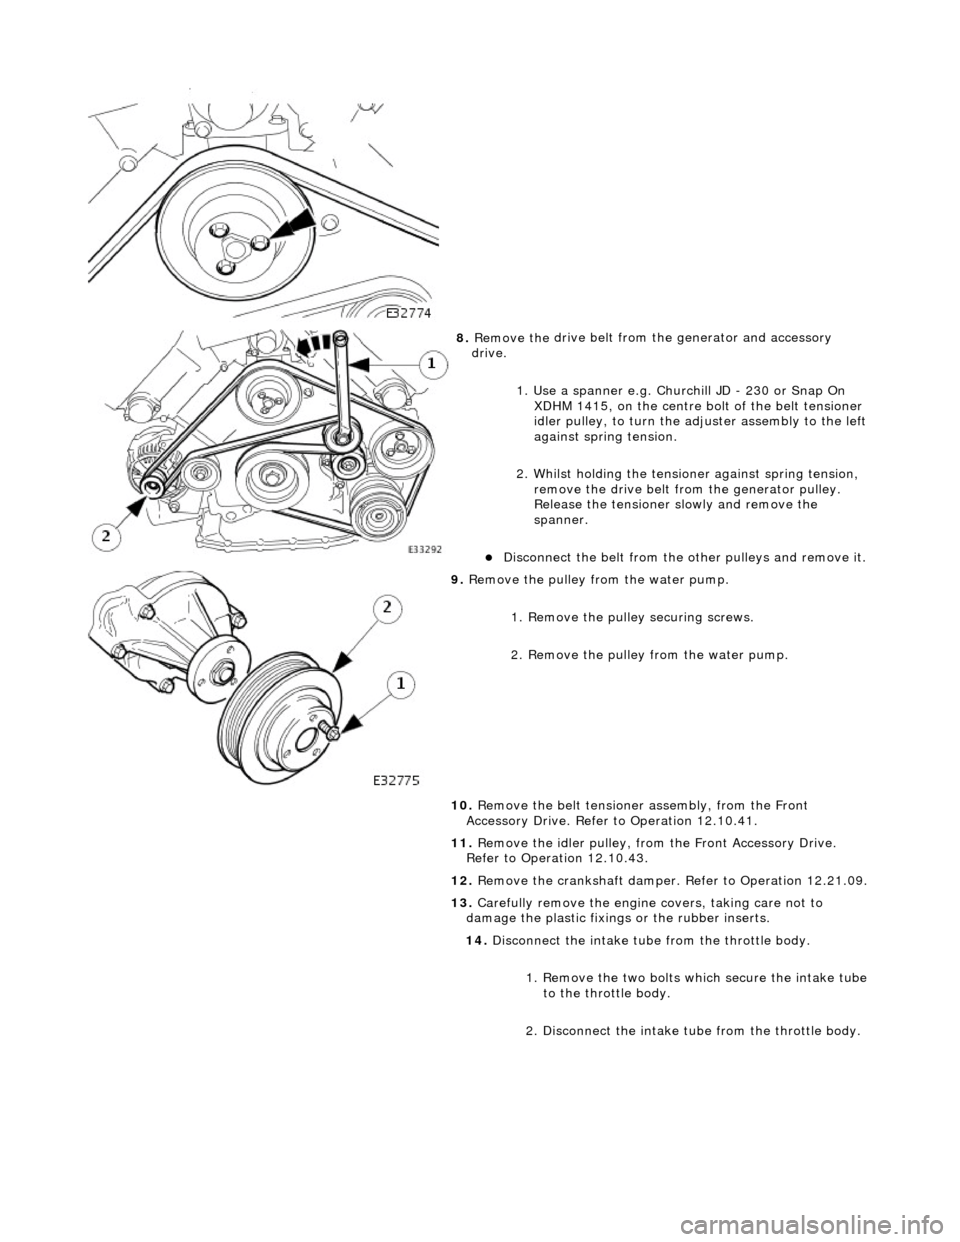 JAGUAR X308 1998 2.G Workshop Manual  
 
8. Remove the 
 drive belt from 
the generator and accessory 
drive. 
1. Use a spanner e.g. Churchill JD - 230 or Snap On XDHM 1415, on the centre bo lt of the belt tensioner 
idler pulley, to tur